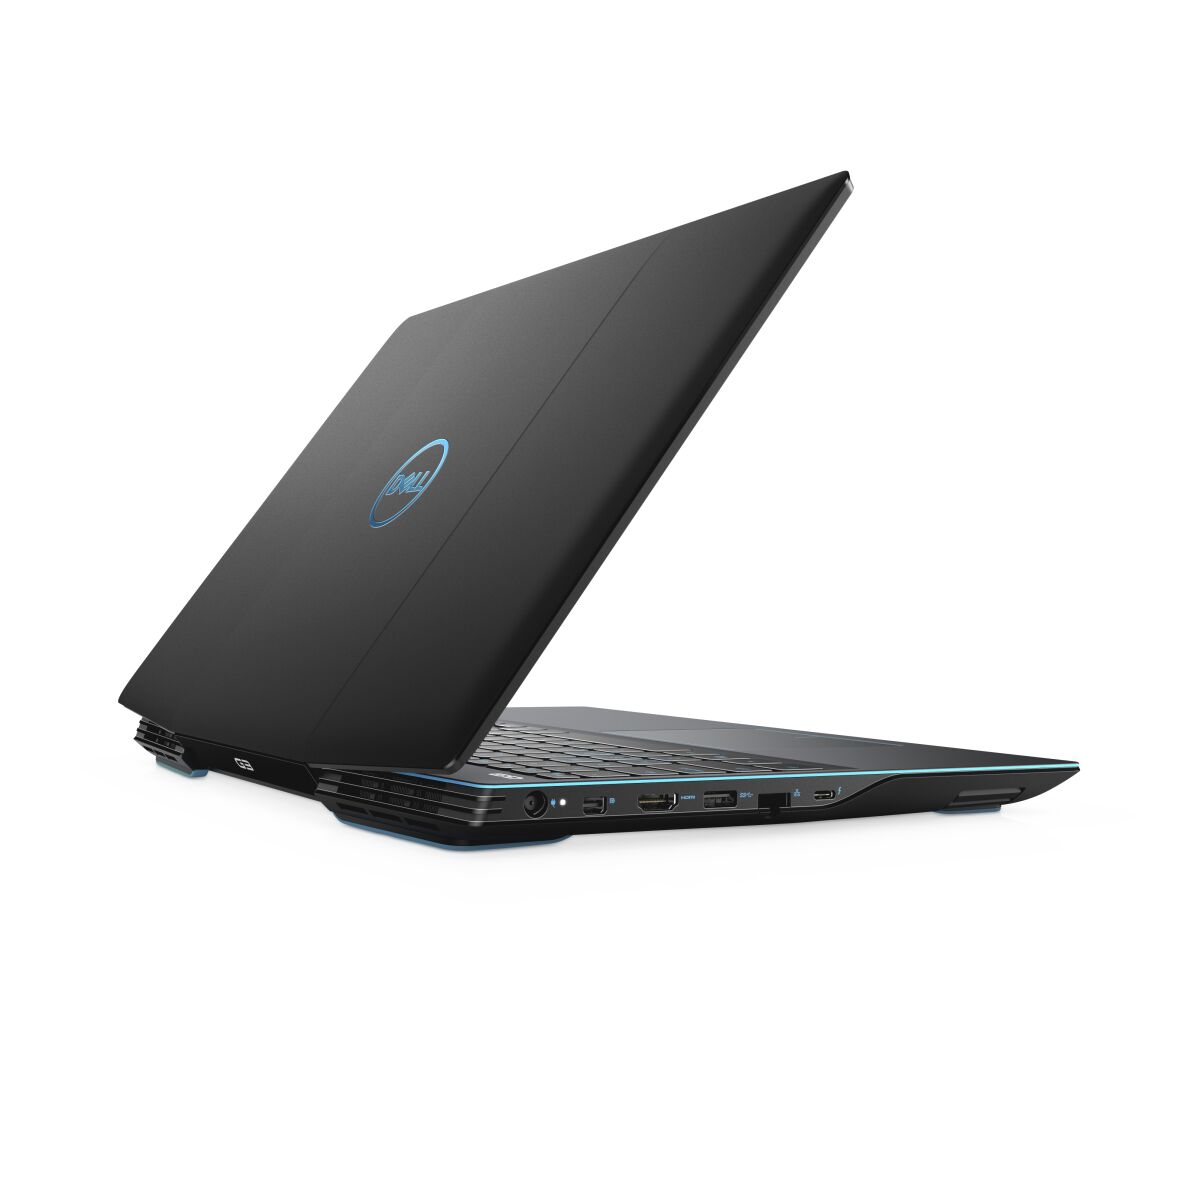 DELL G3 3500 - 3500-0931 laptop specifications